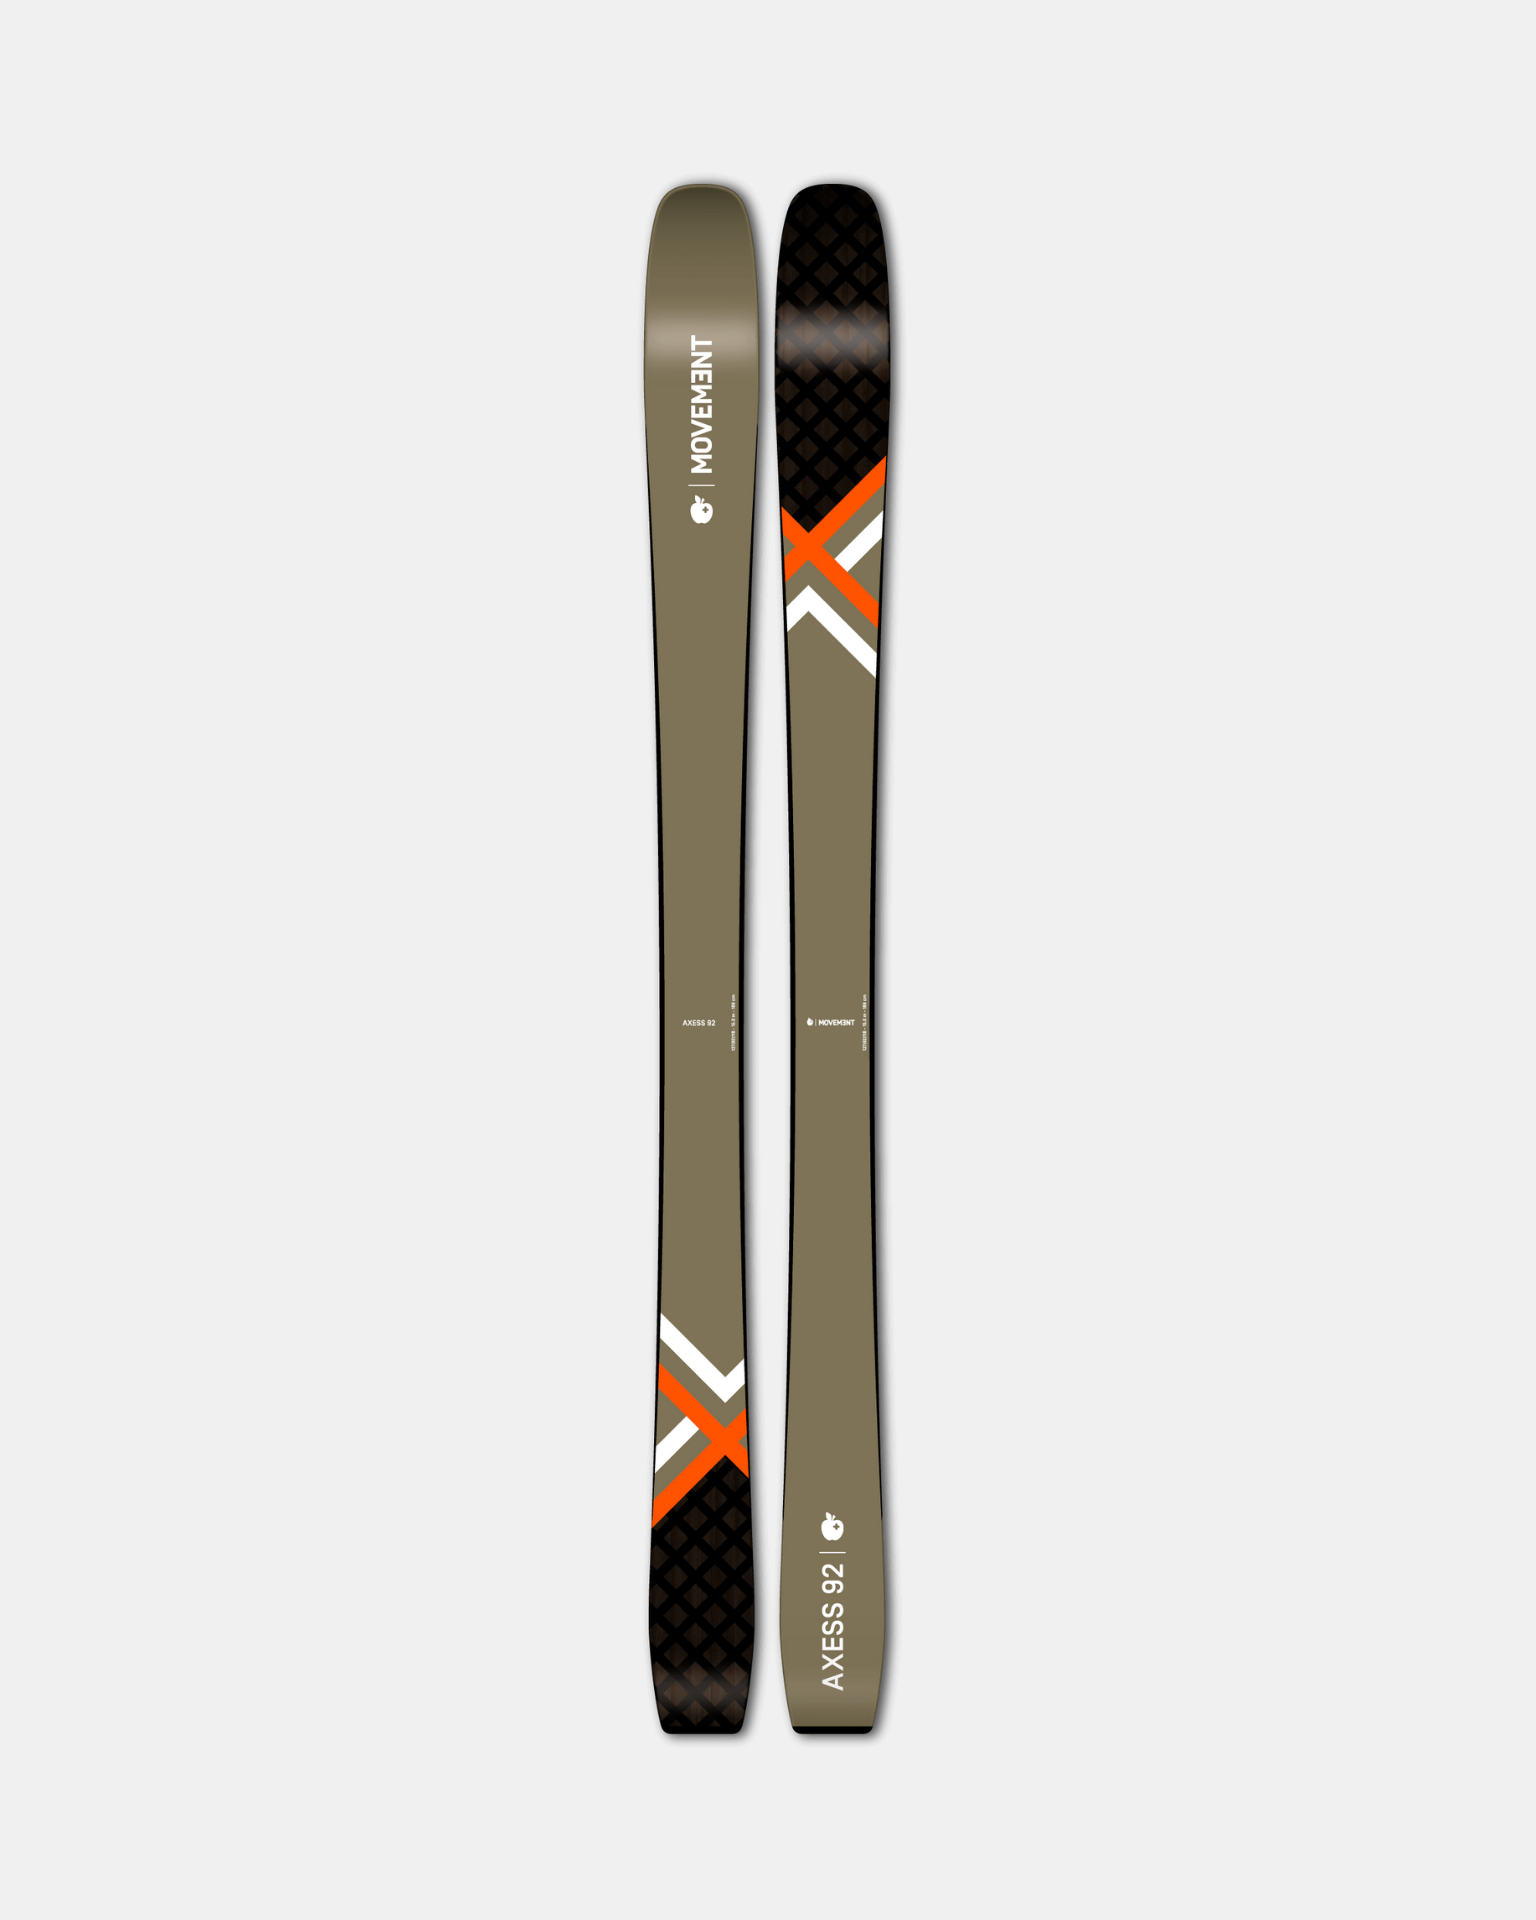 Elevate your skiing journey with Movement's Axess 92 all-terrain skis.